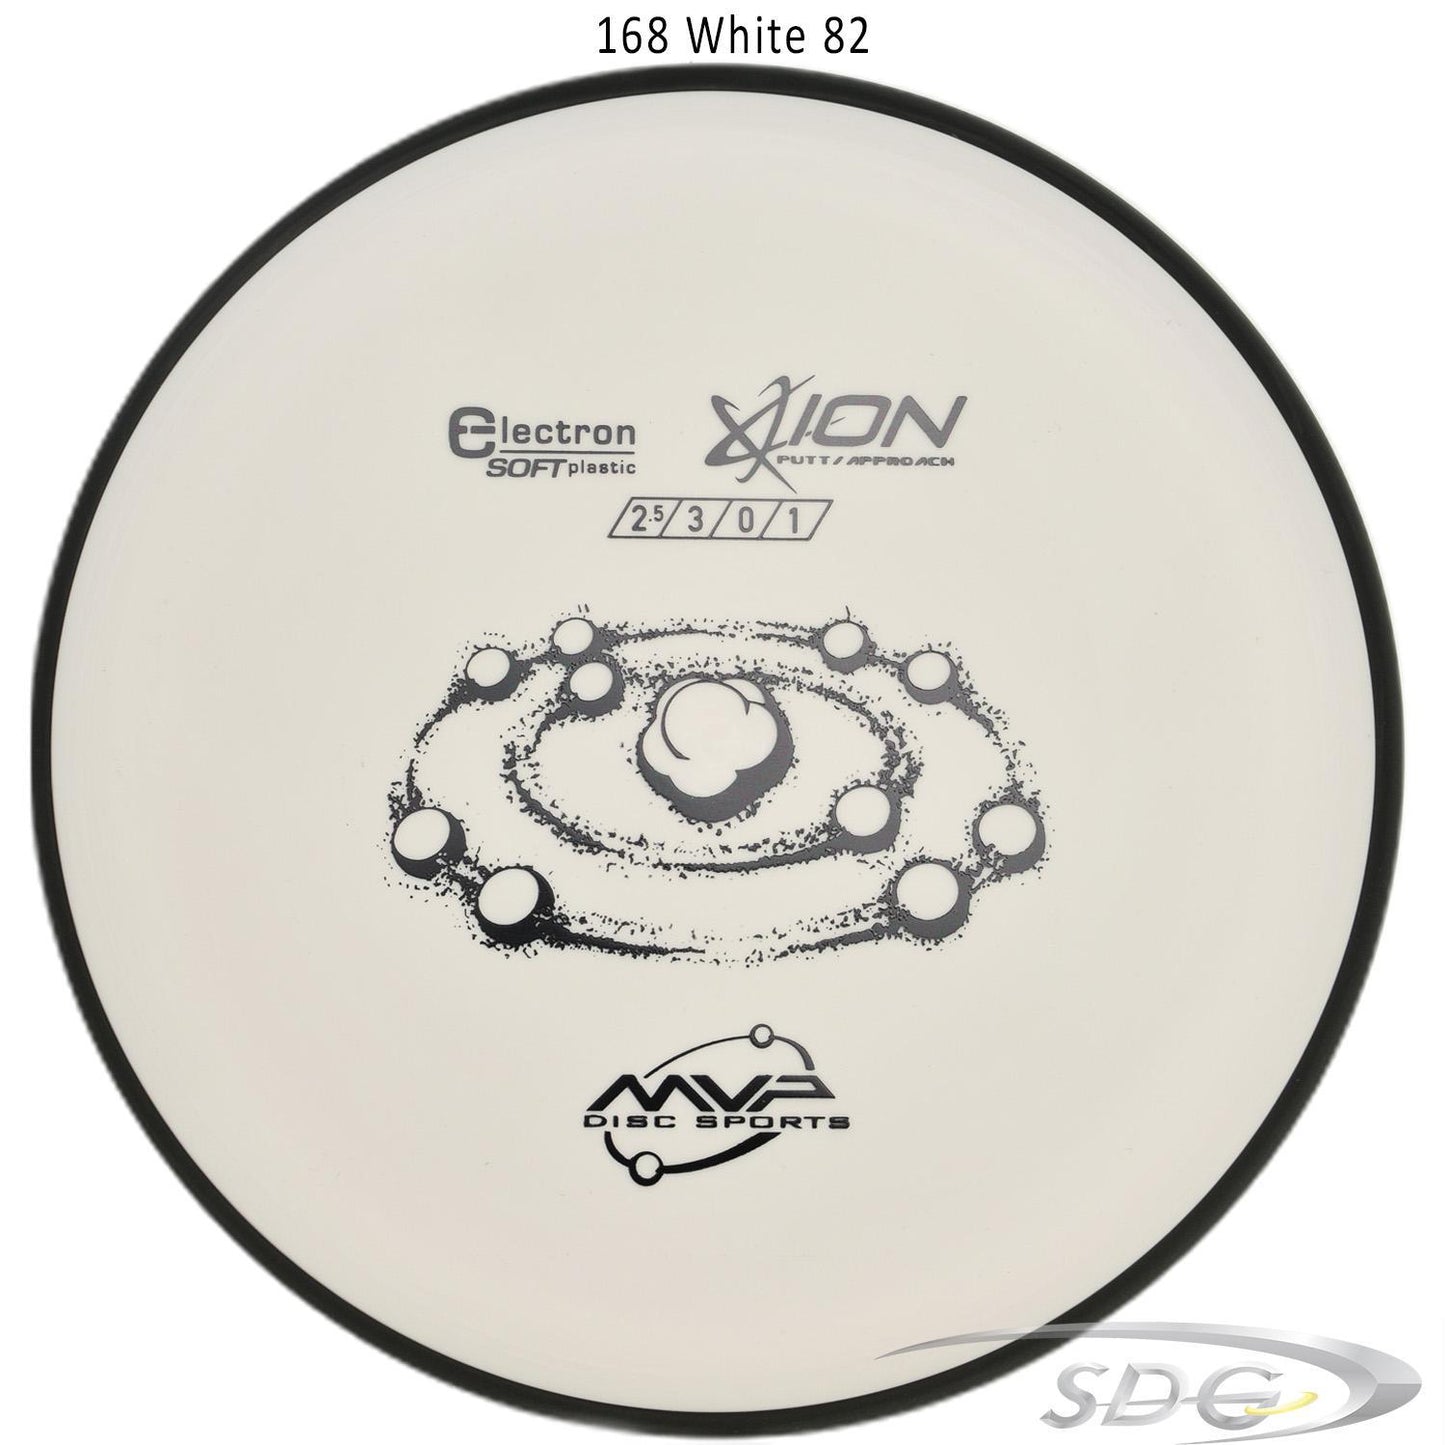 mvp-electron-ion-soft-disc-golf-putt-approach 168 White 82 